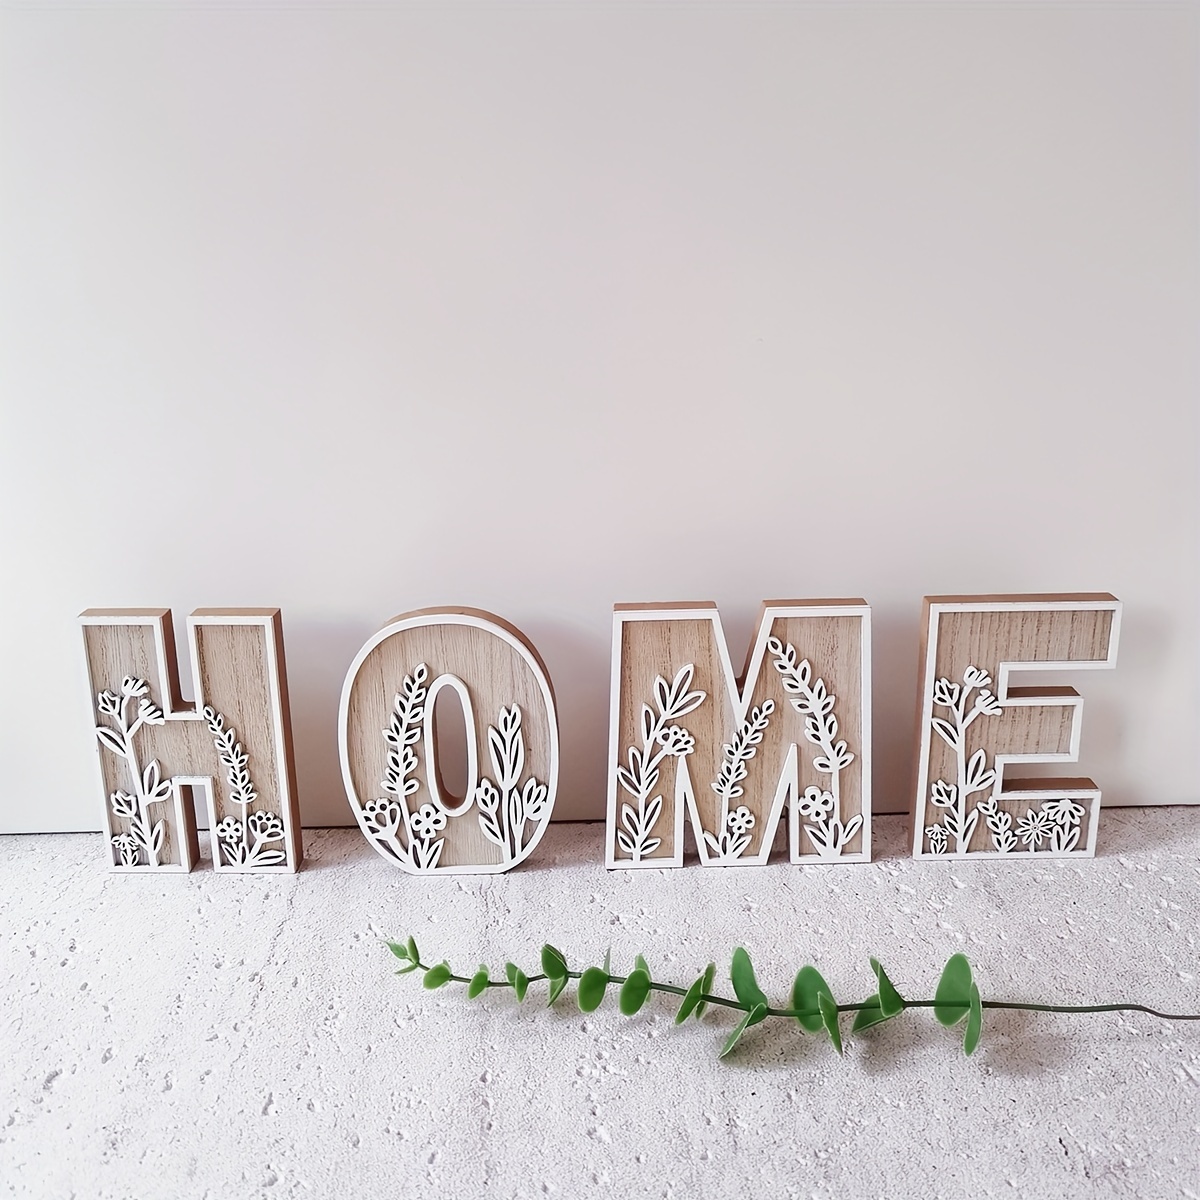 

Wooden Decorative Carved Letters With Floral Designs - Perfect For Home, Kitchen, Or Wedding Decorations - Multi-purpose And Suitable For Tabletop Display - English Language